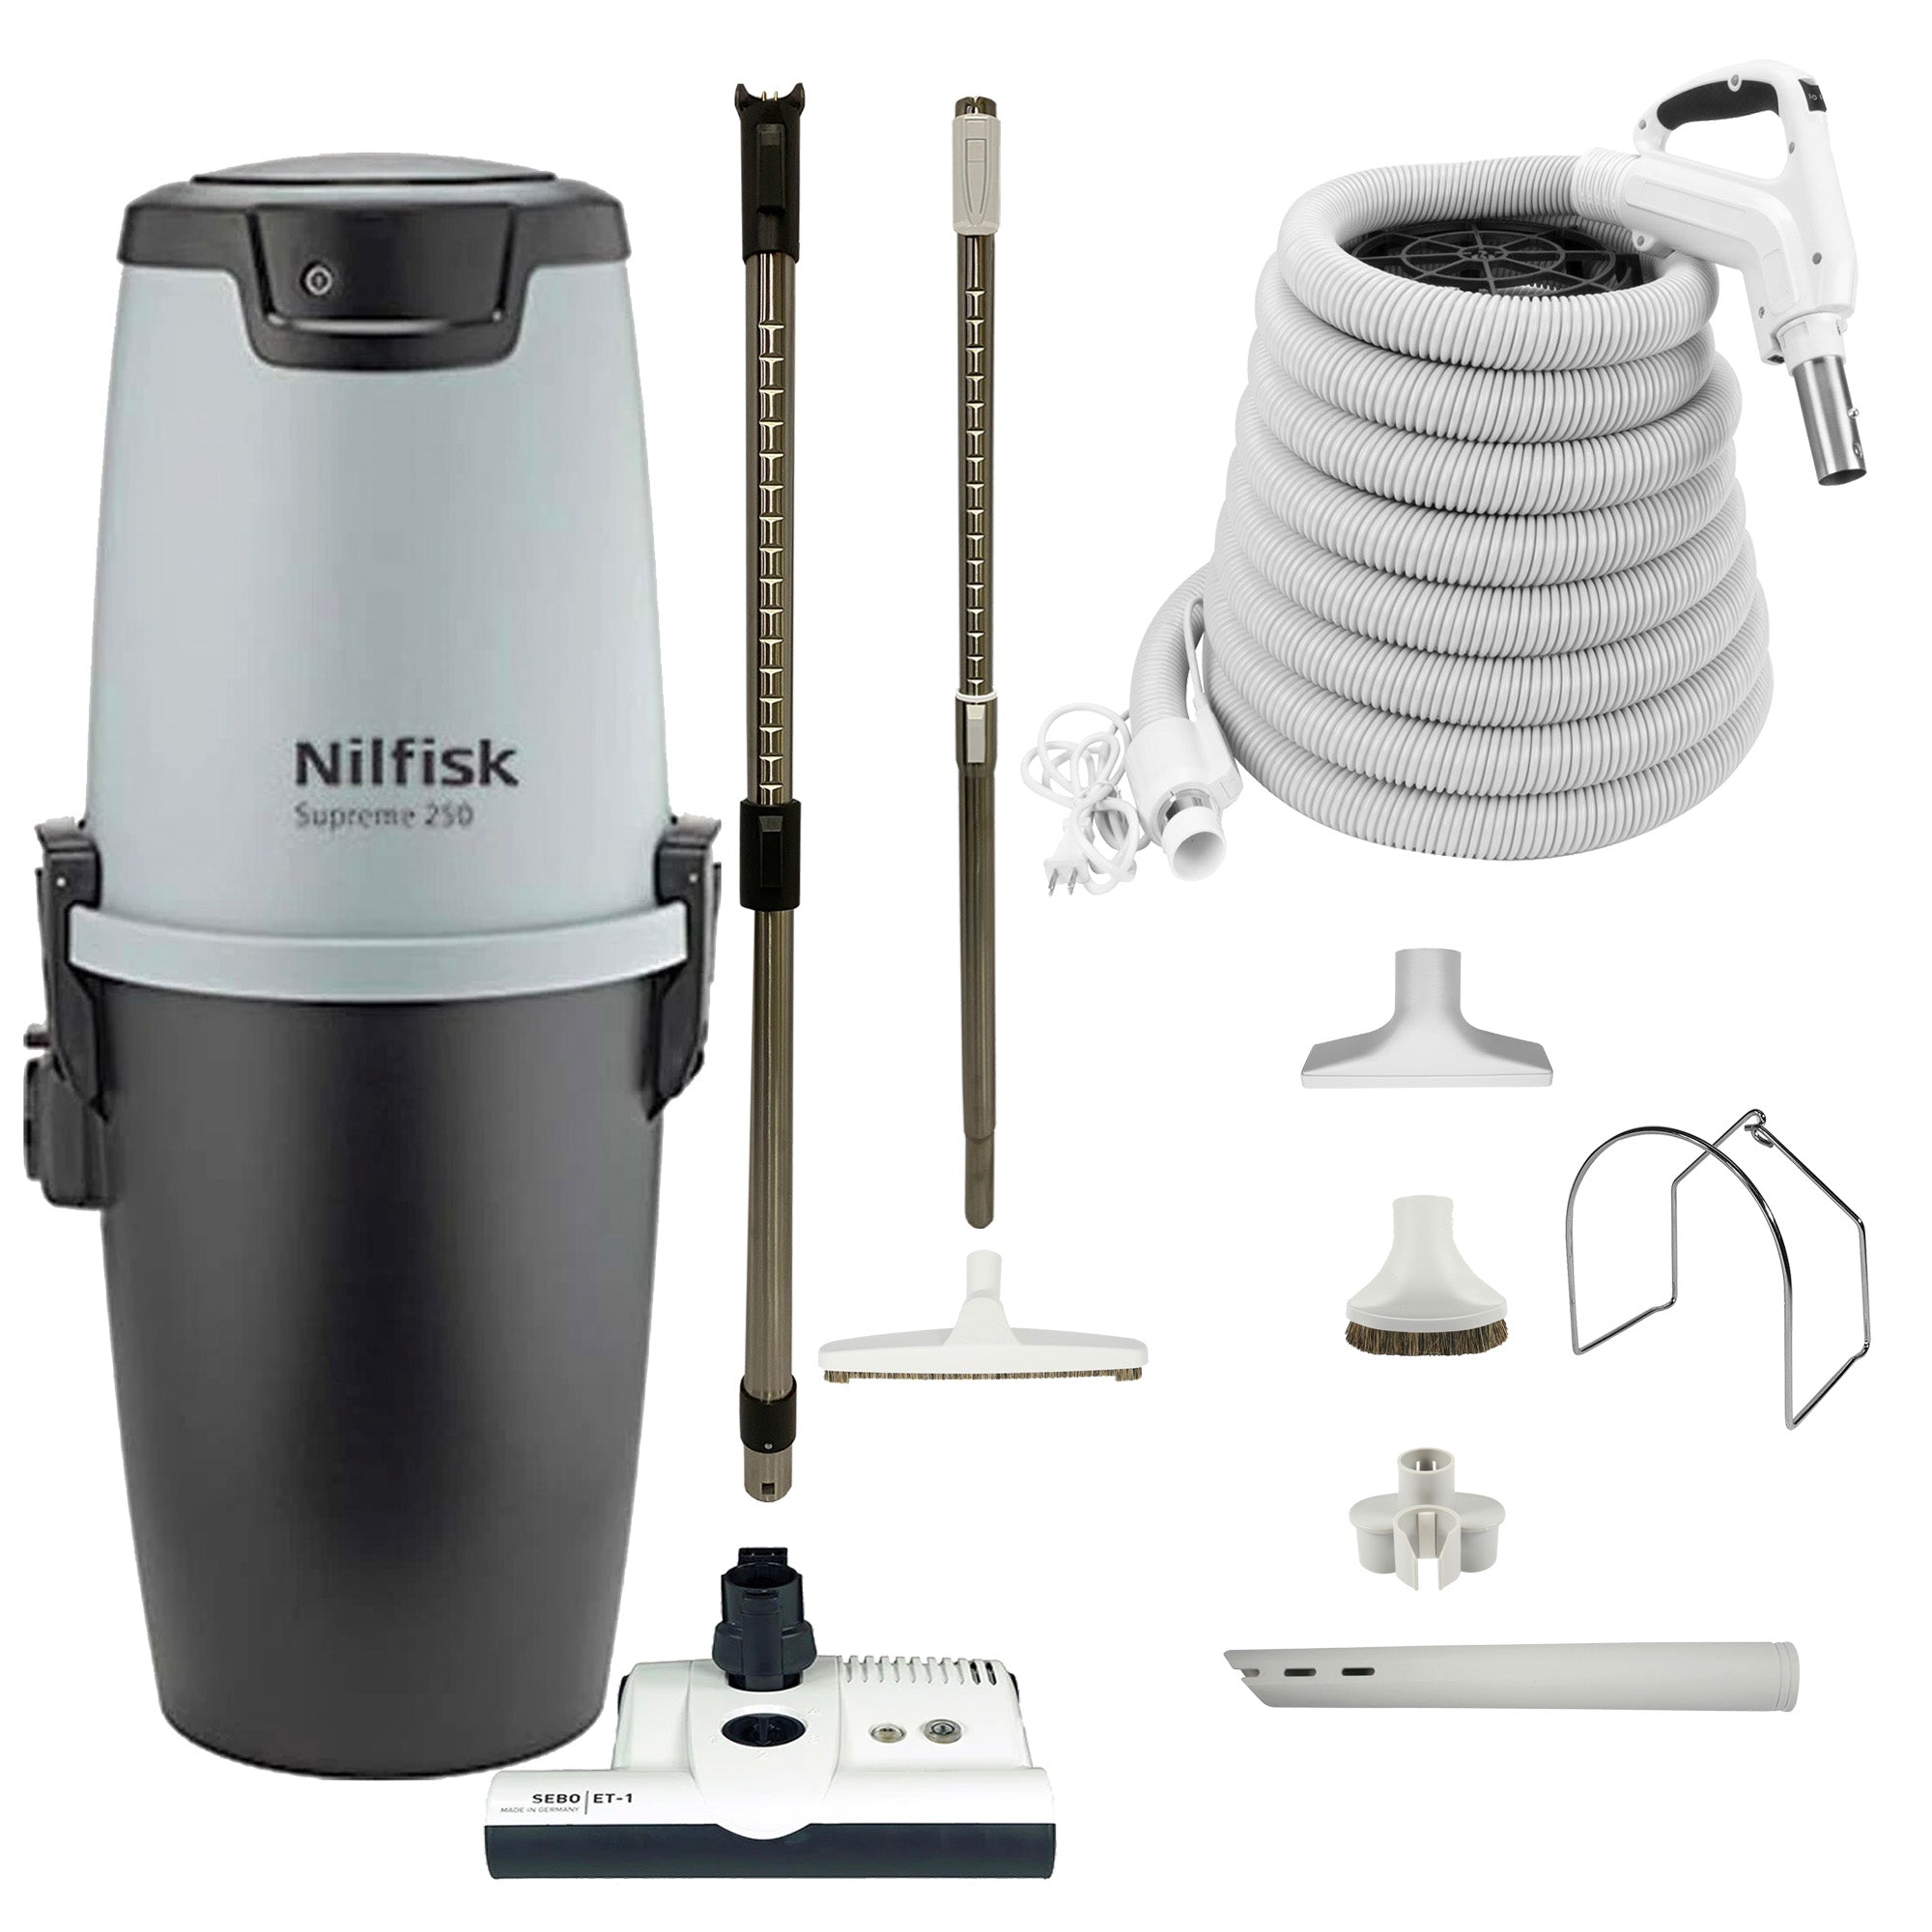 Nilfisk Supreme 250 Central Vacuum with SEBO ET-1 Electric Powerhead and Premium Electric Package - White